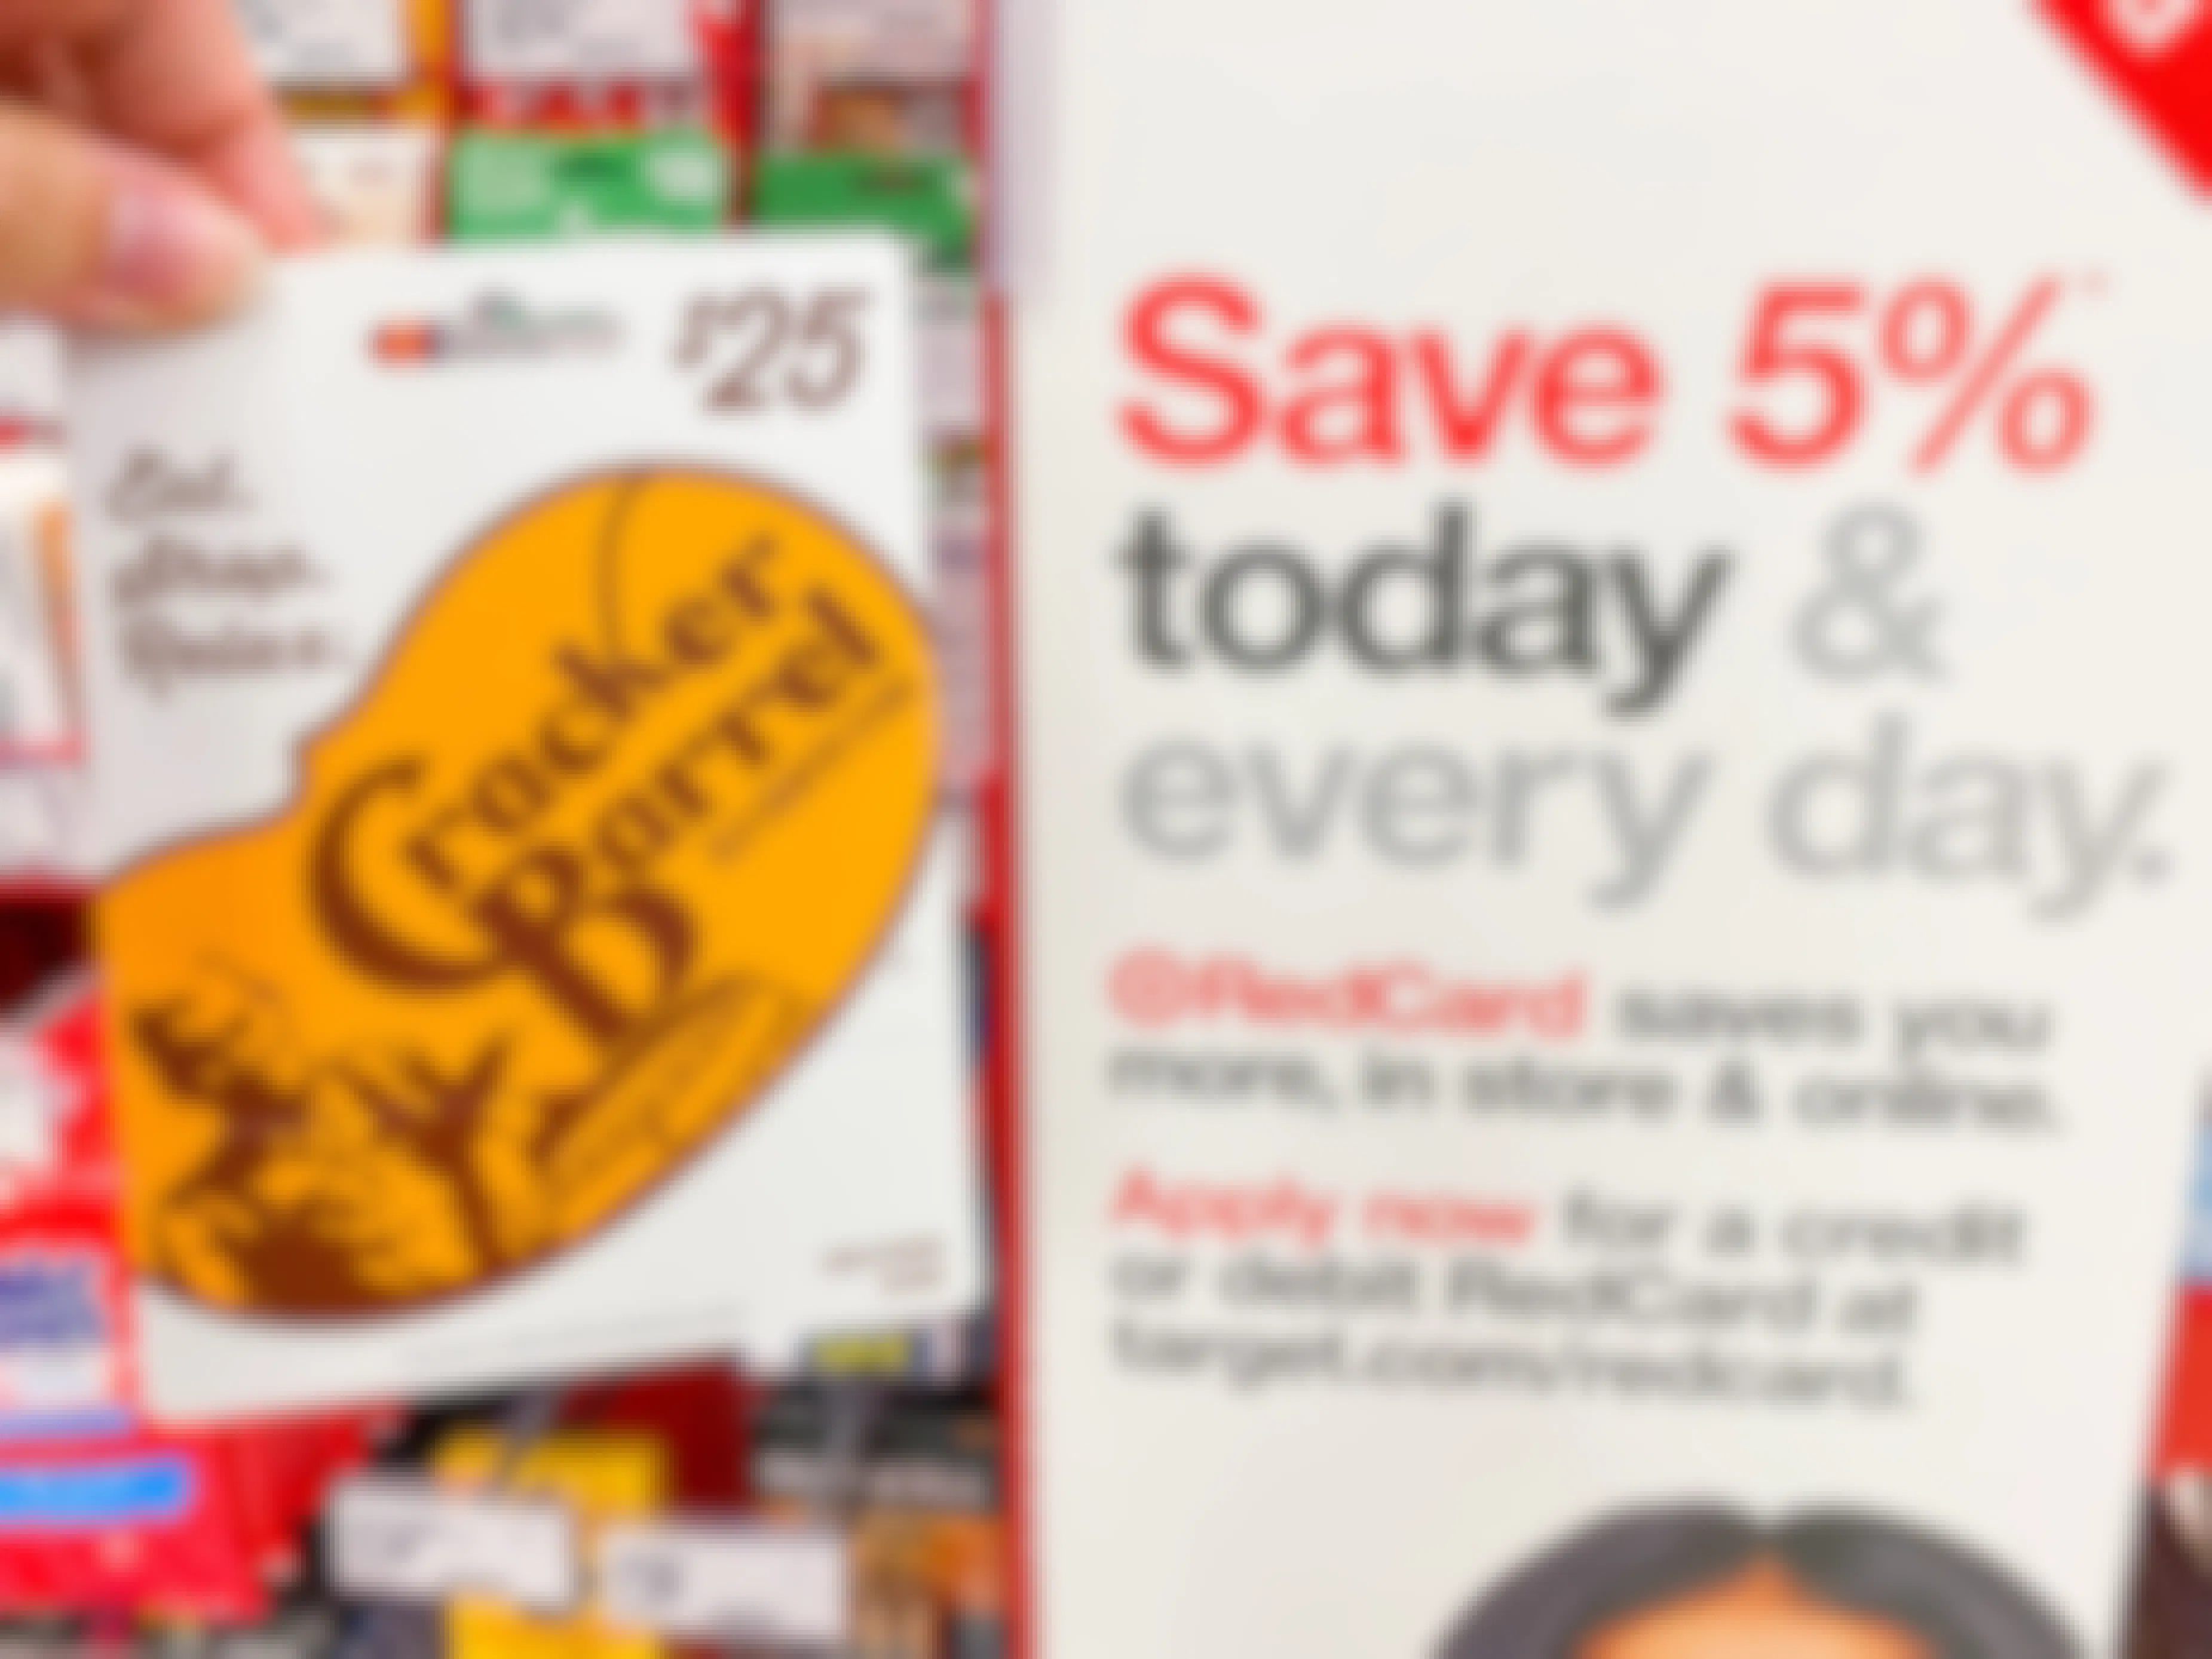 A person's hand holding a Cracker Barrel gift card next to an advertisement for the RedCard at Target.